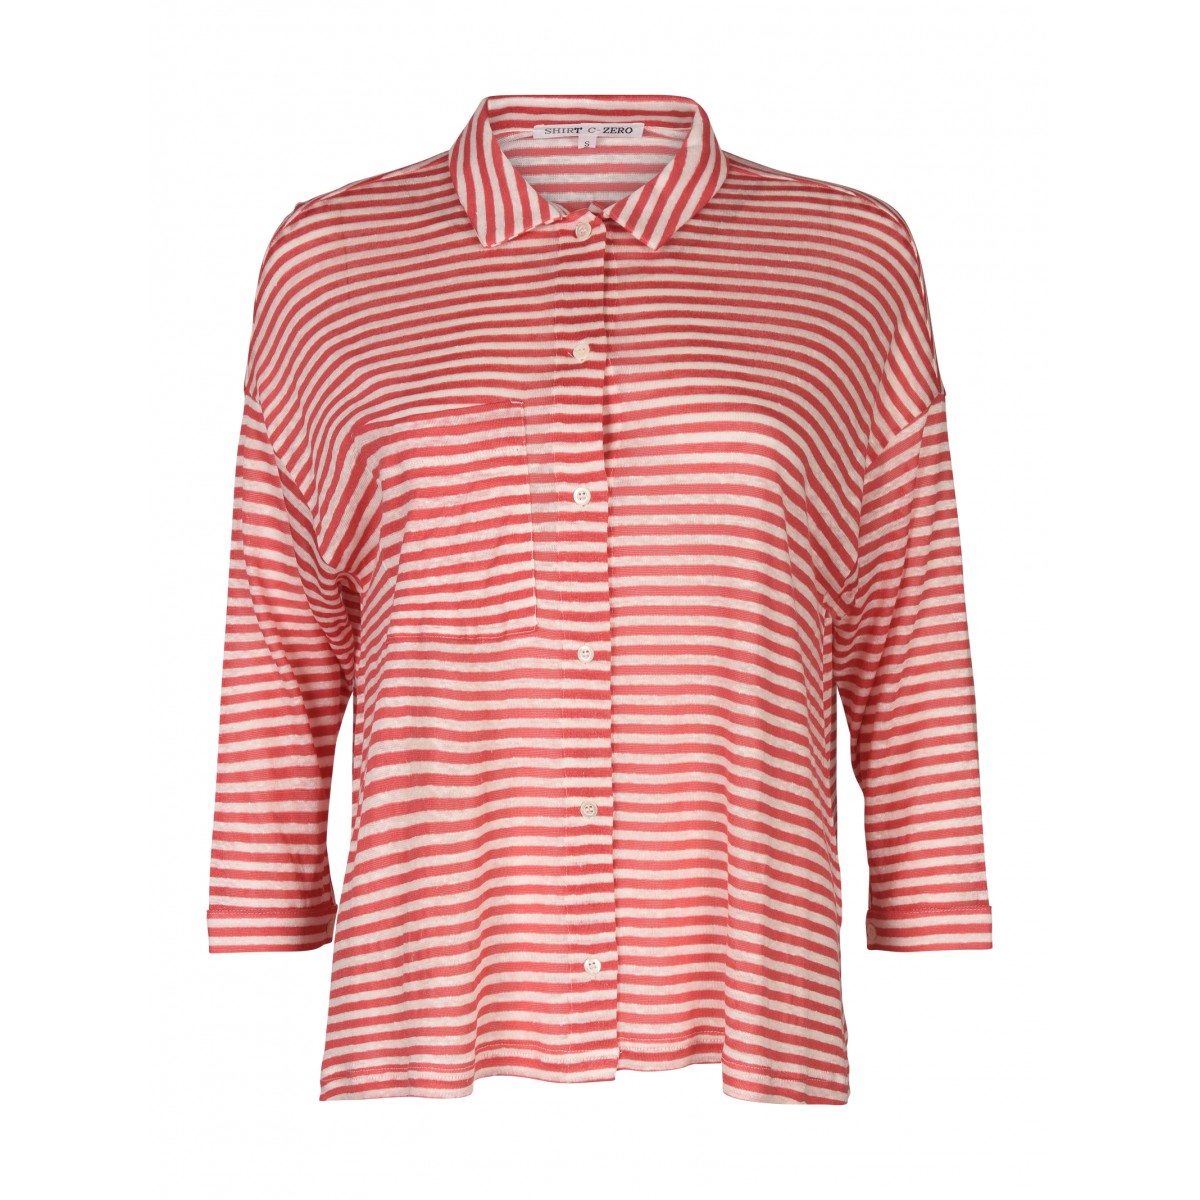 Red and White striped linen shirt